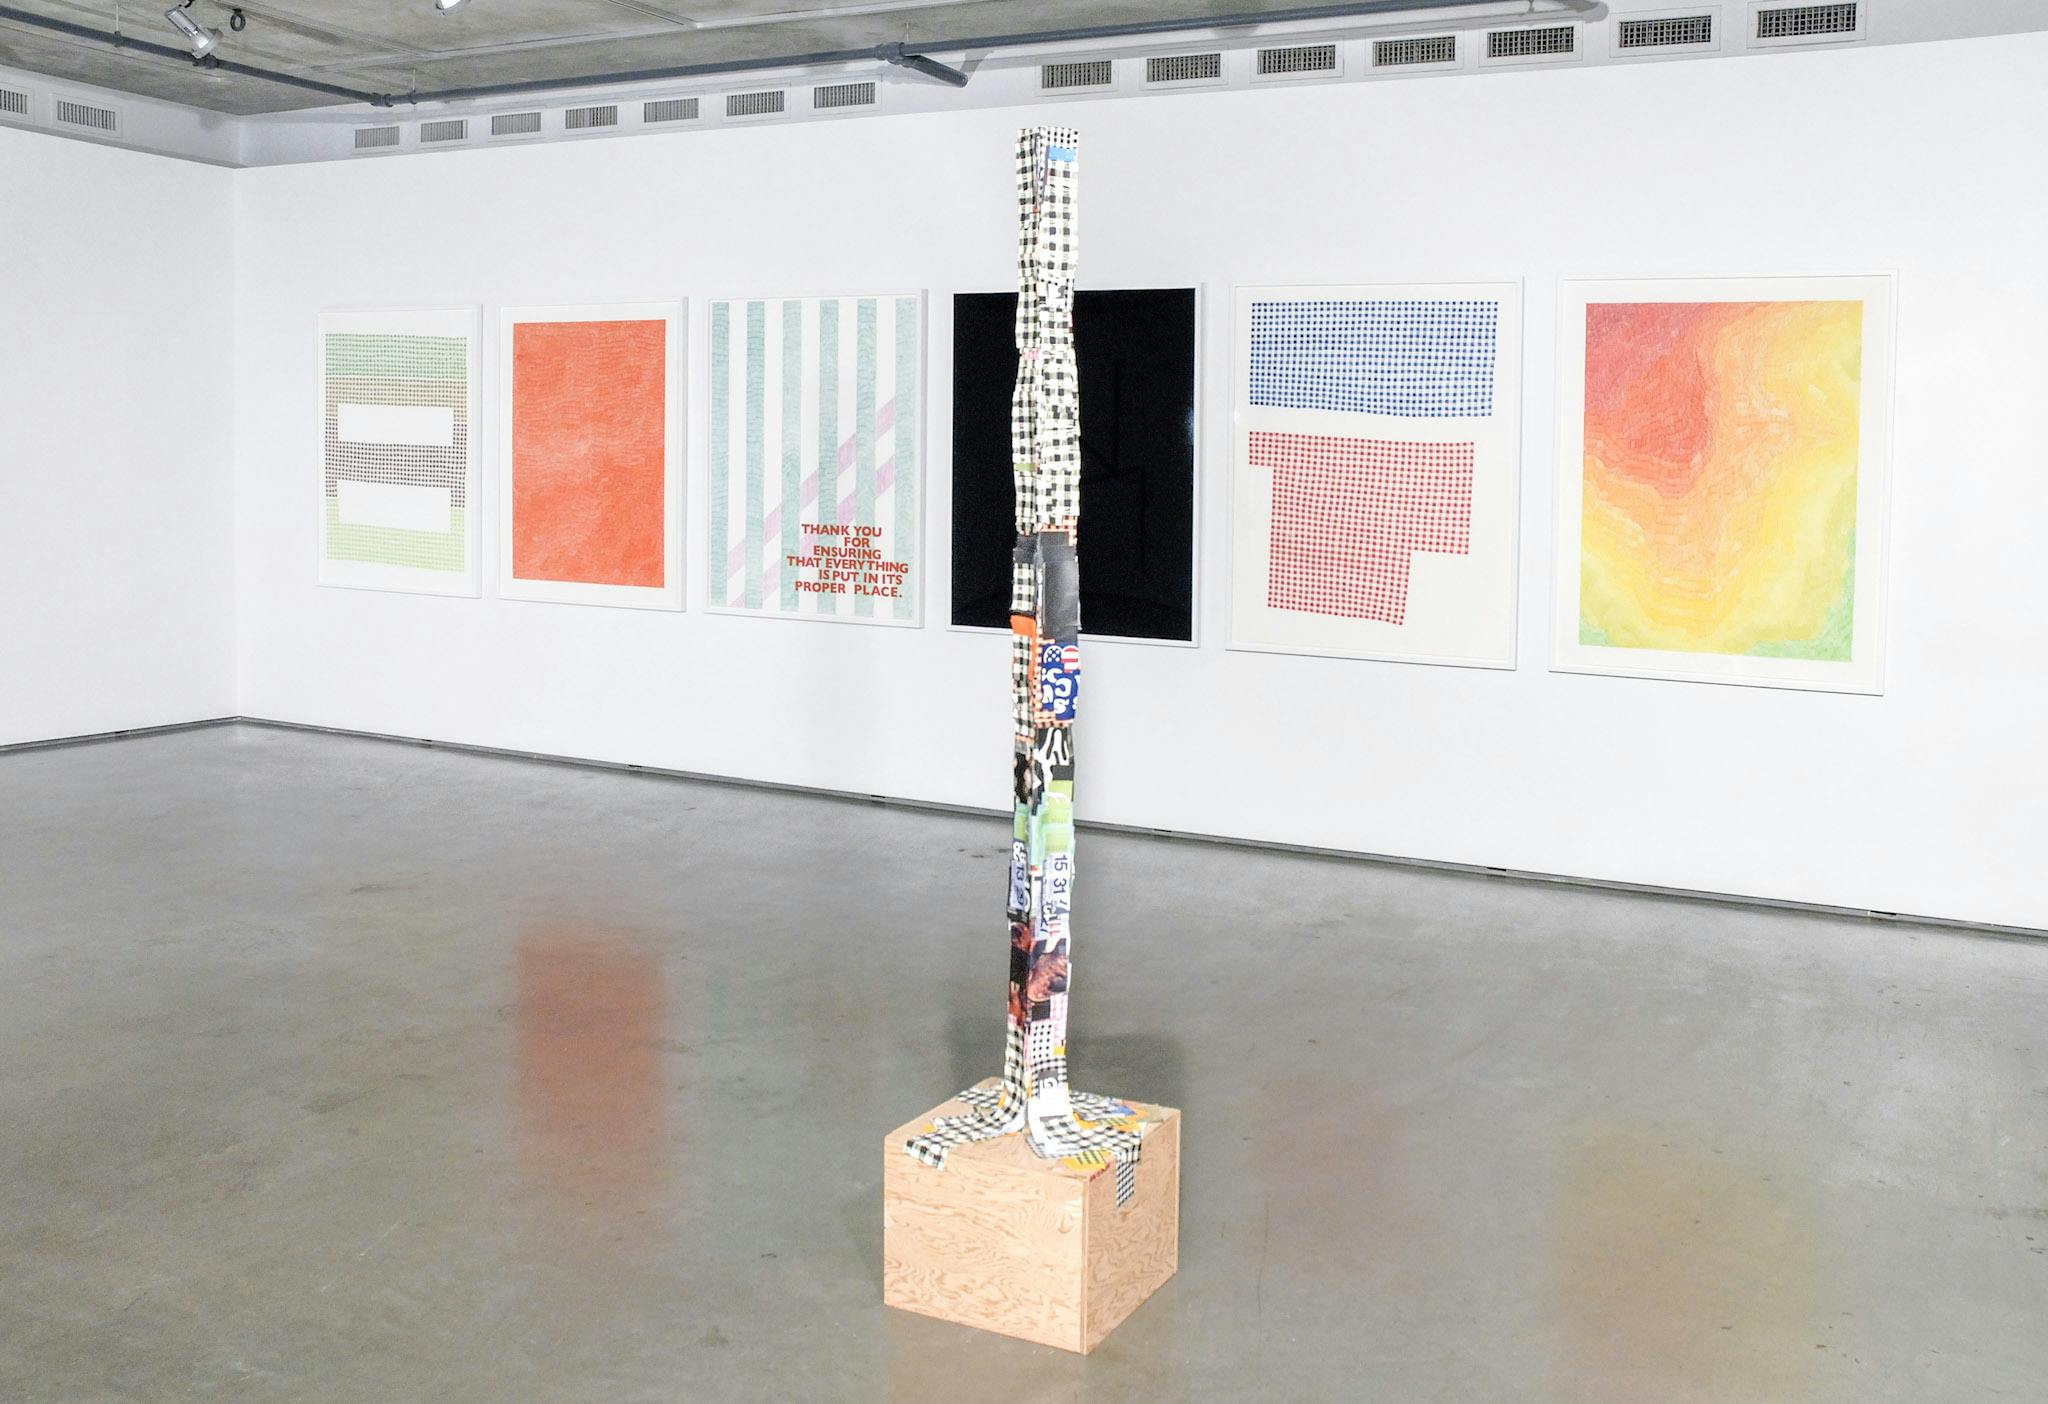 Various artworks are installed in a gallery space. Six large-sized two-dimensional works are mounted on the gallery walls. A thin tall sculpture covered with cutout papers stands on the floor.  